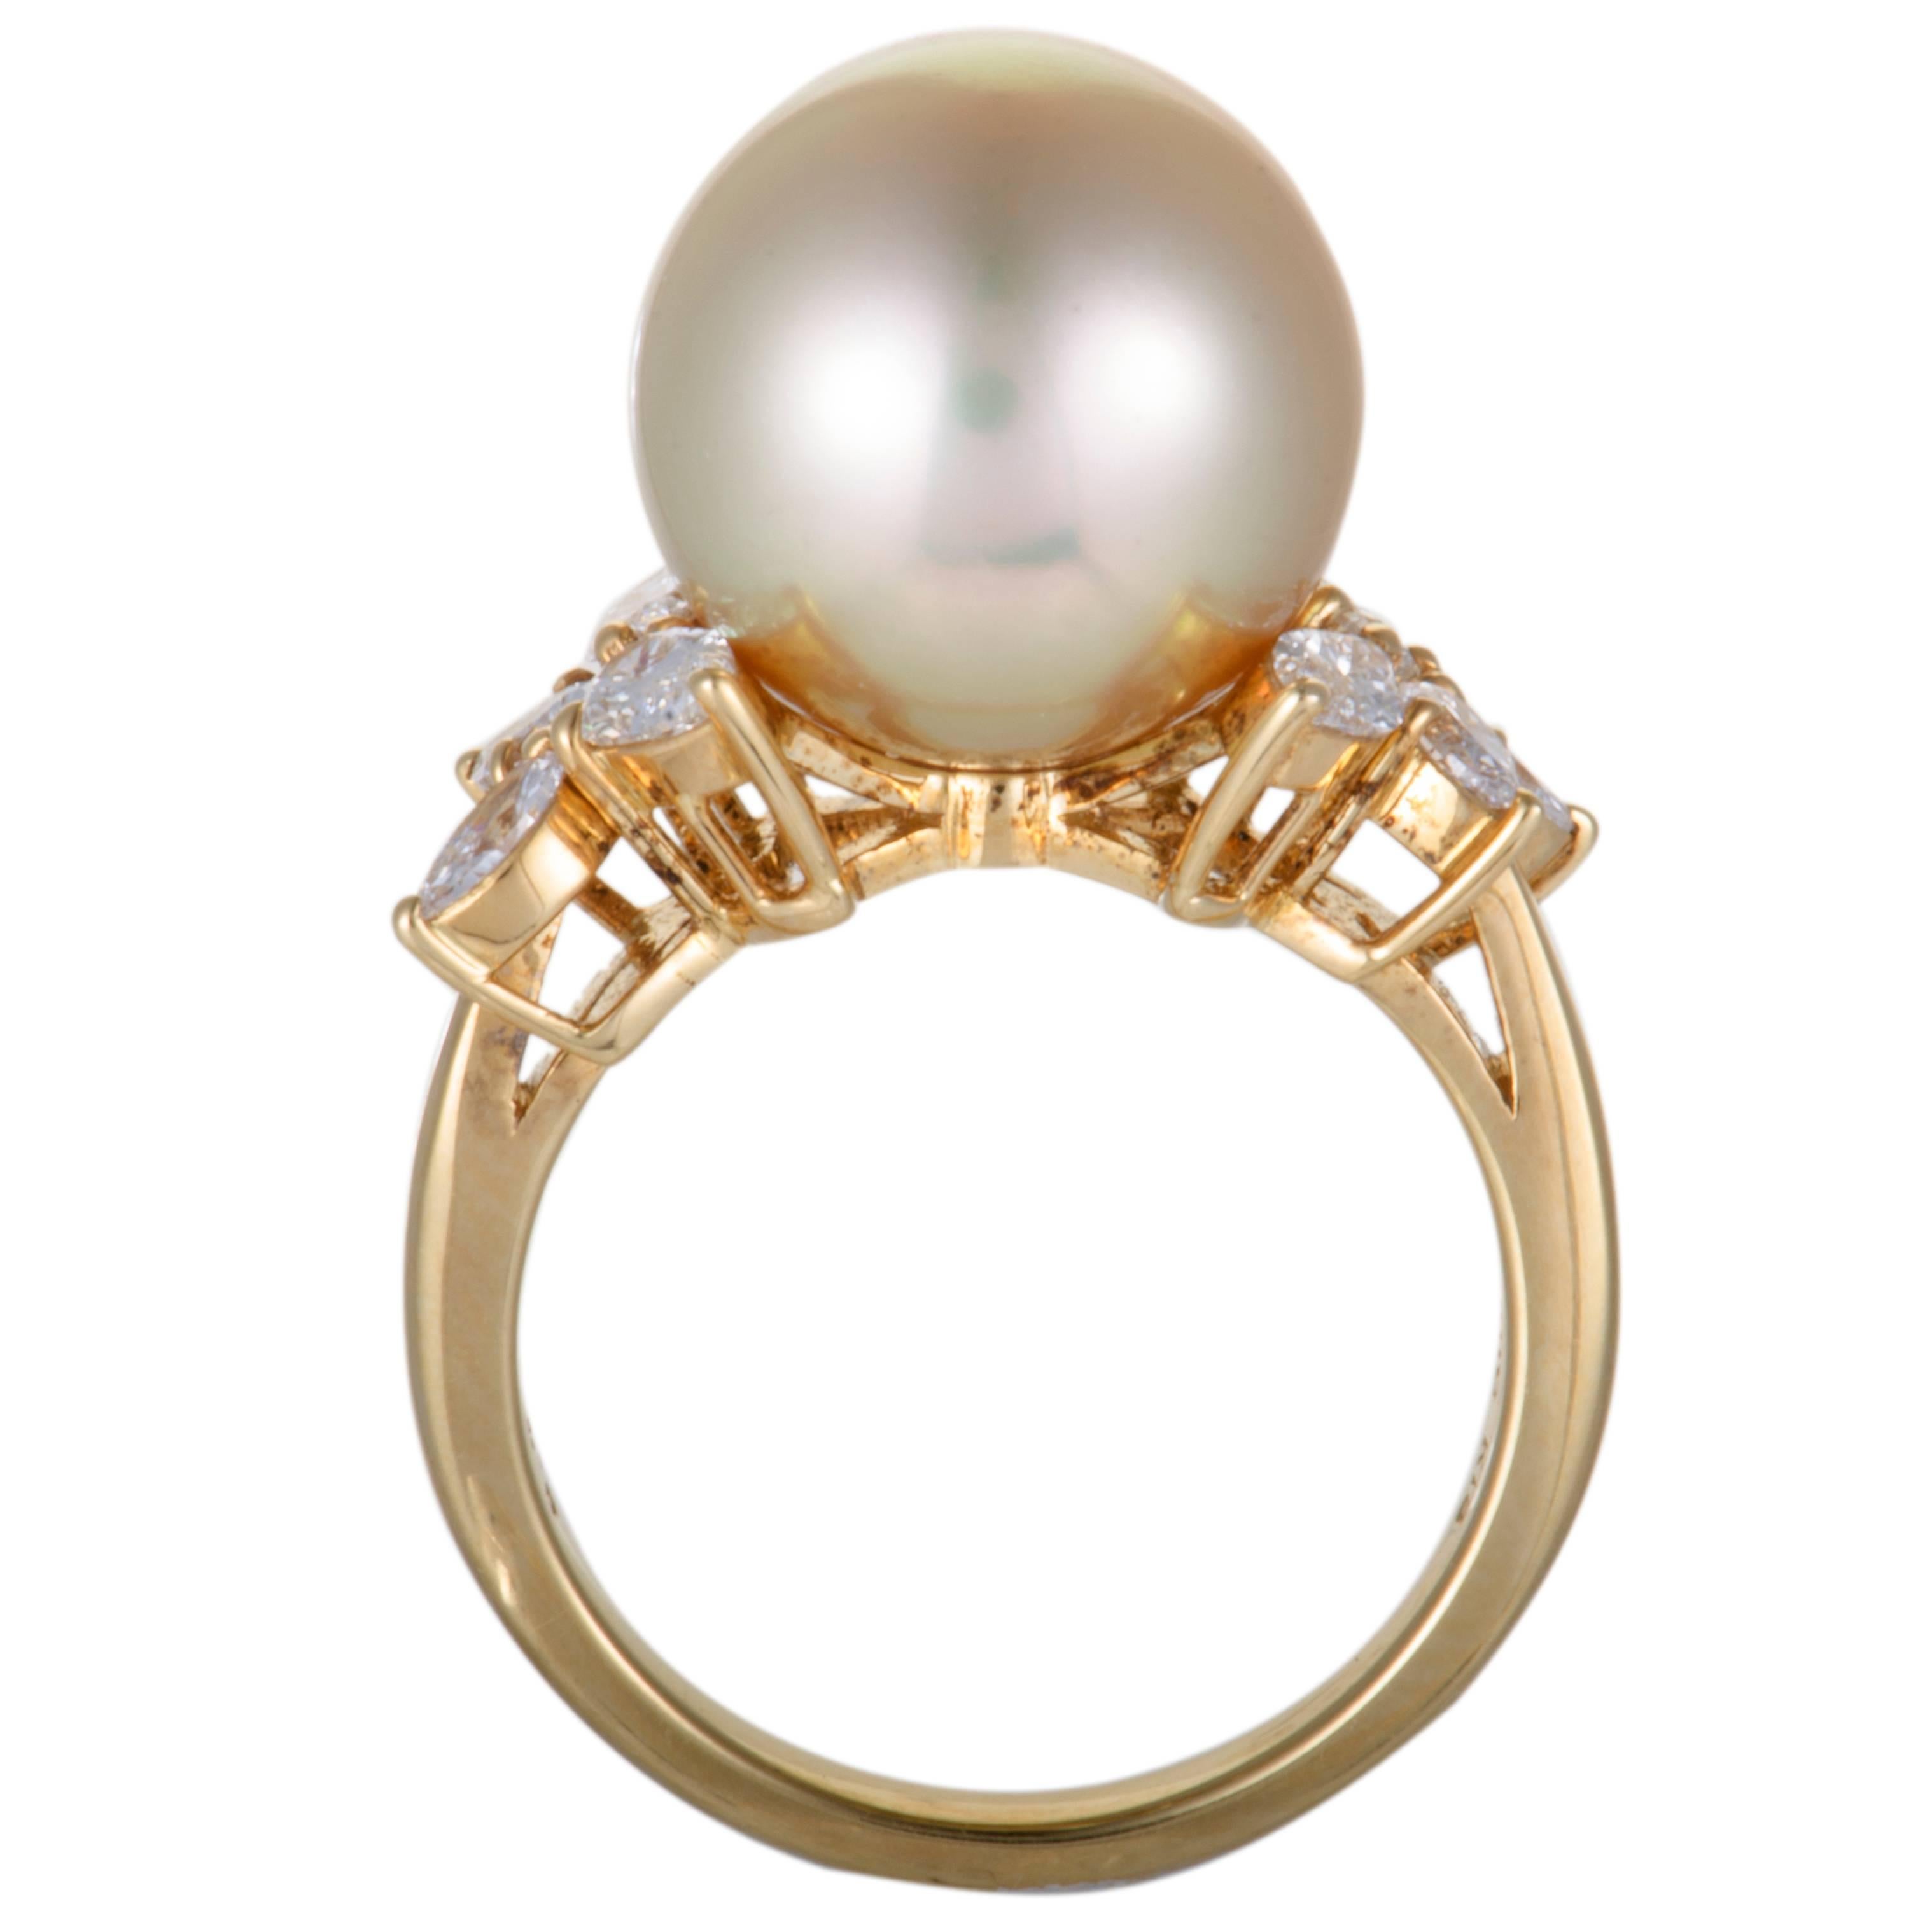 This stylish 18K yellow gold ring by Mikimoto boasts a sublime aesthetic effect in its artsy design. The ring's gracefully elegant design is accentuated by an adornment of 0.75ct of scintillating diamonds and a spectacular white pearl of 12.3